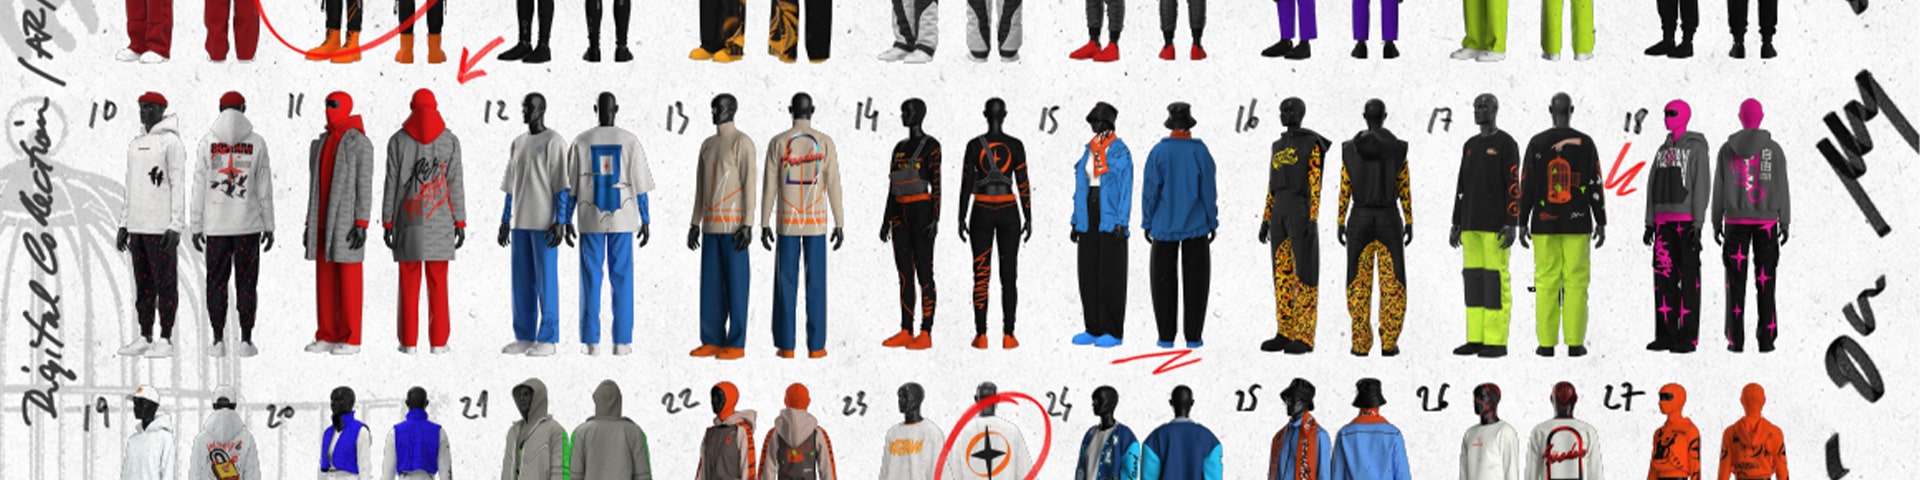 image of many manikins in a line wearing an assortment of clothing